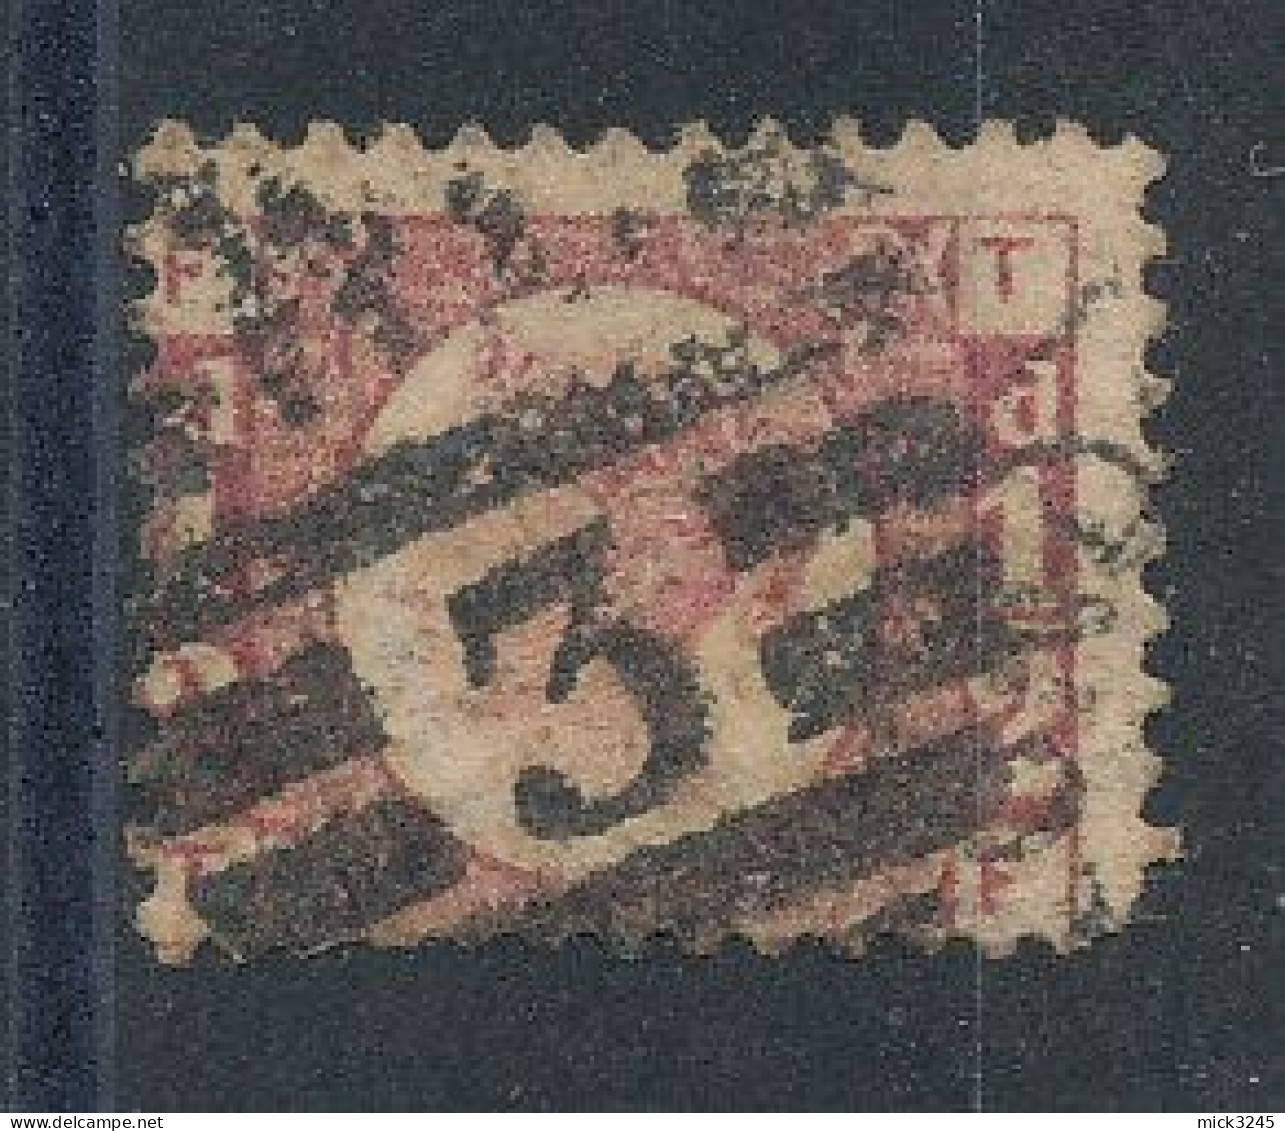 GB  N°49 Victoria 1/2p Rouge De 1870 - Used Stamps